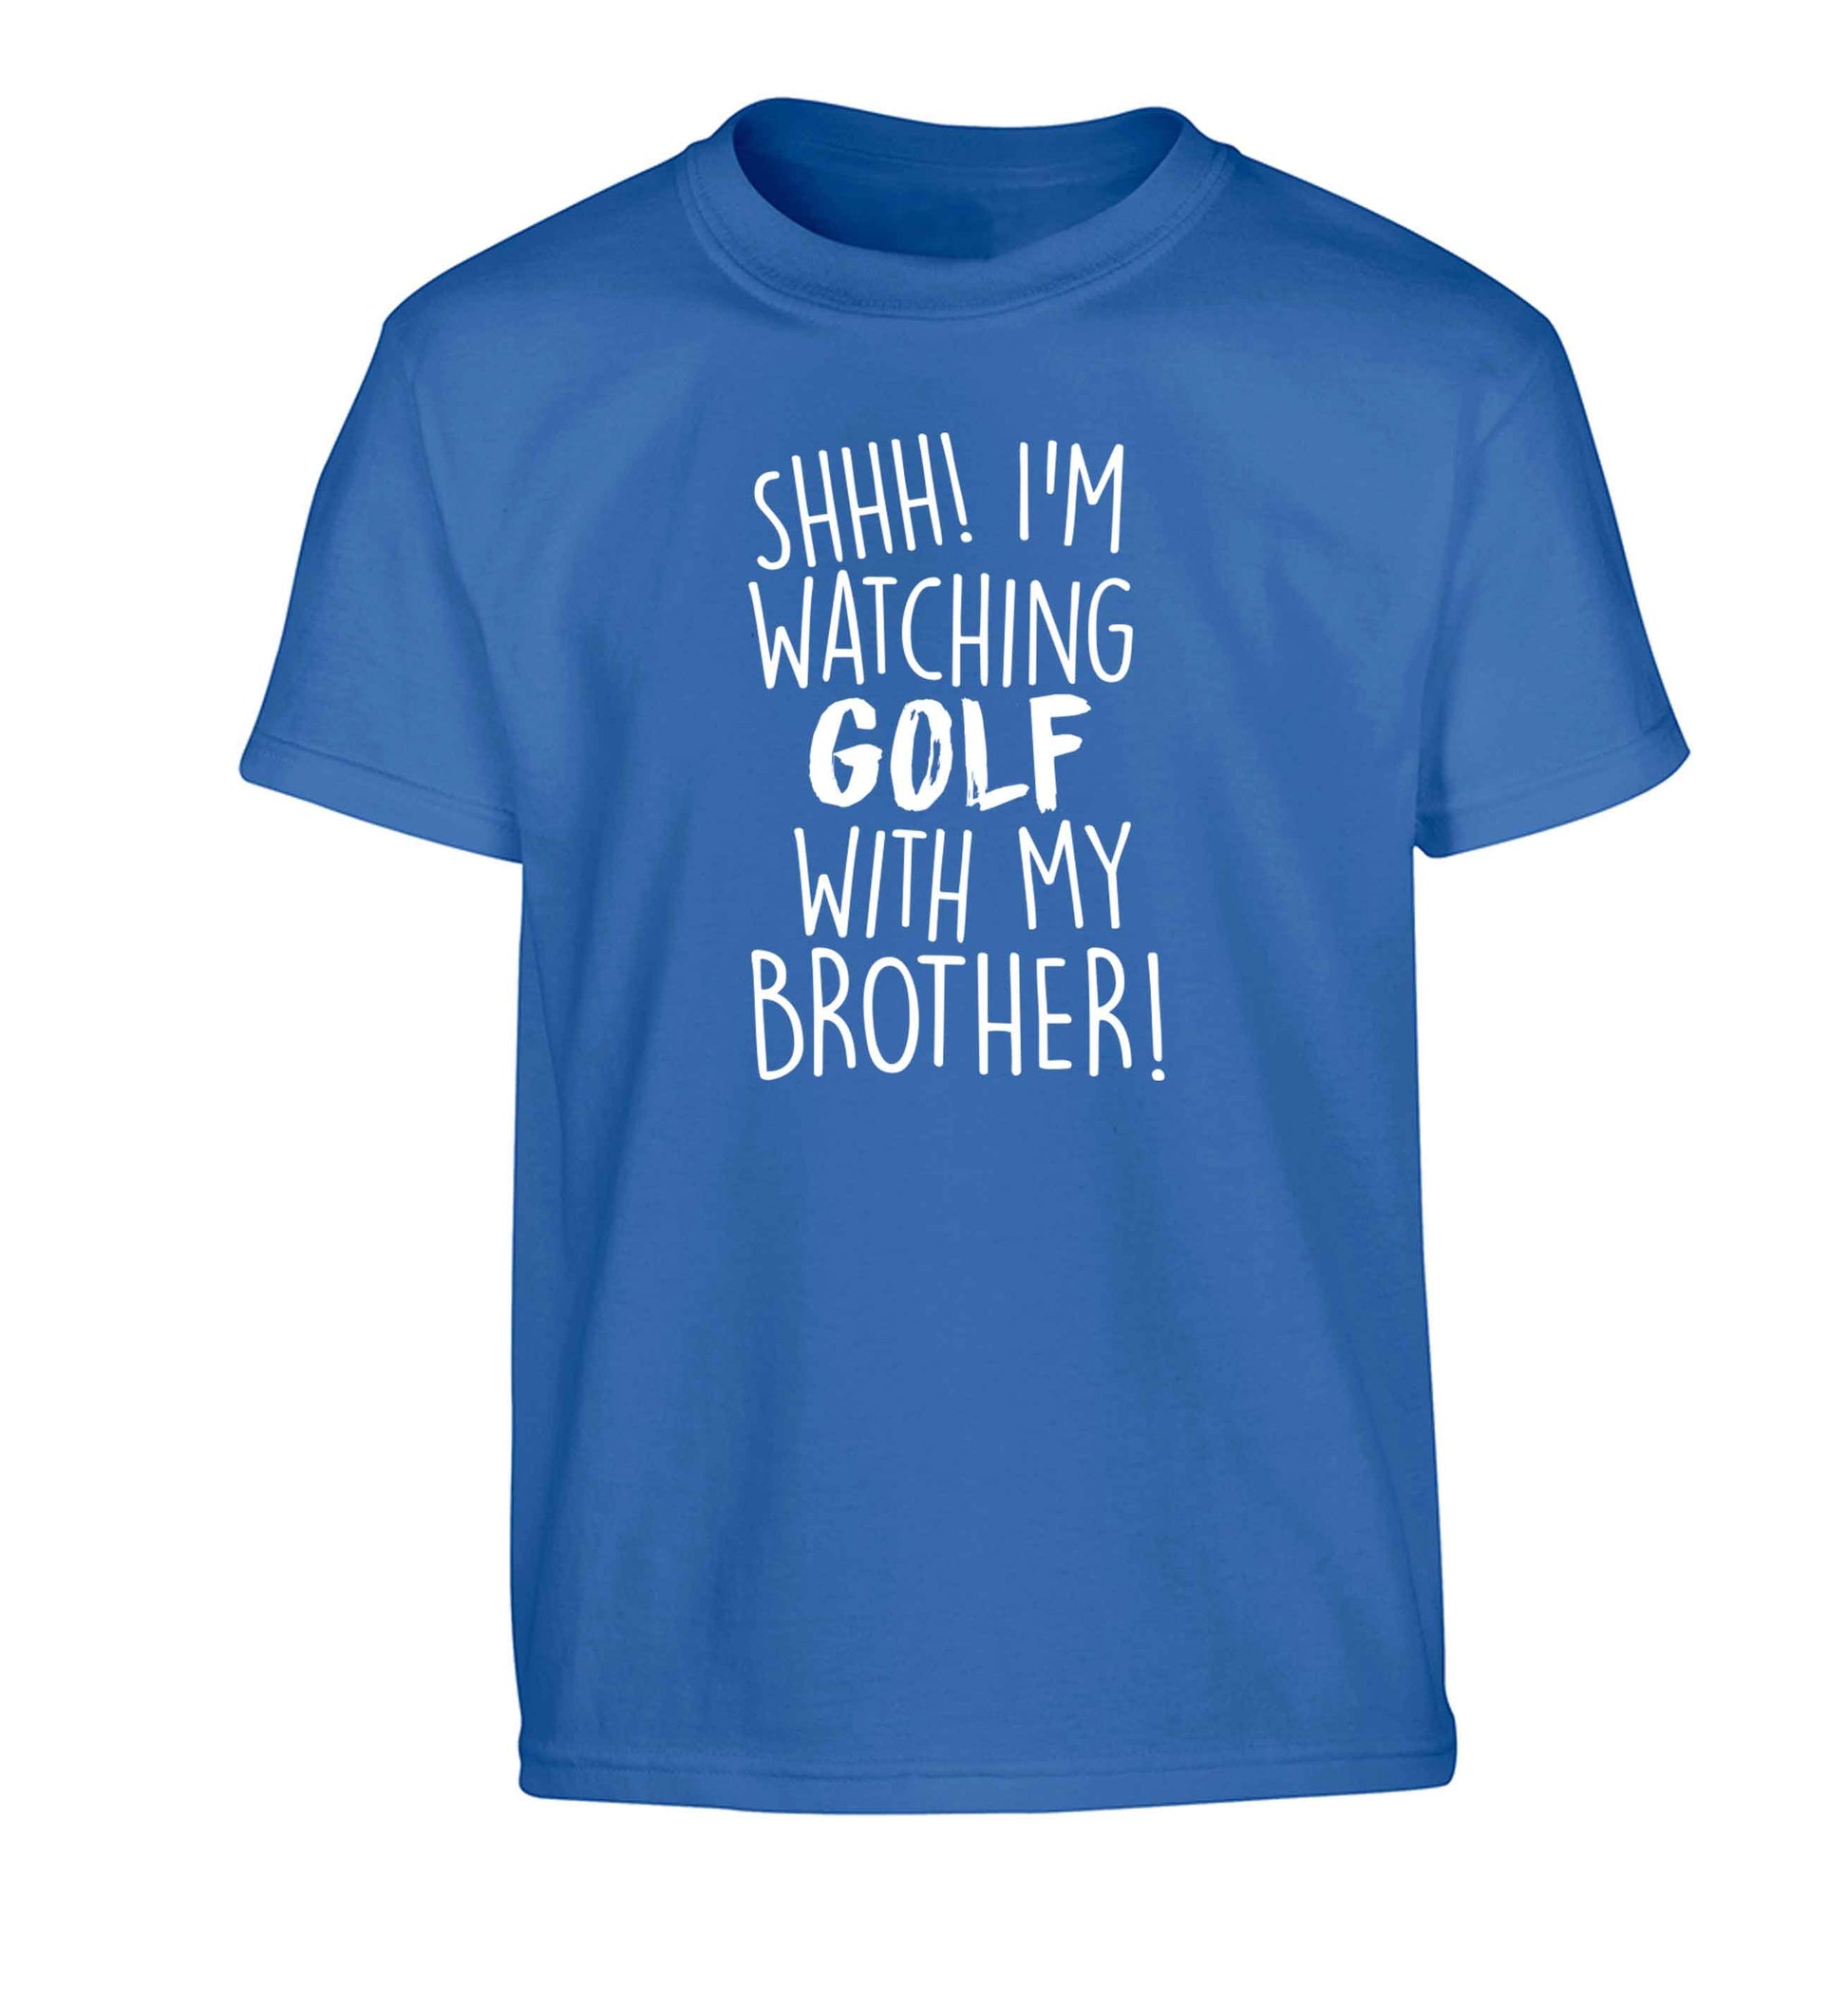 Shh I'm watching golf with my brother Children's blue Tshirt 12-13 Years